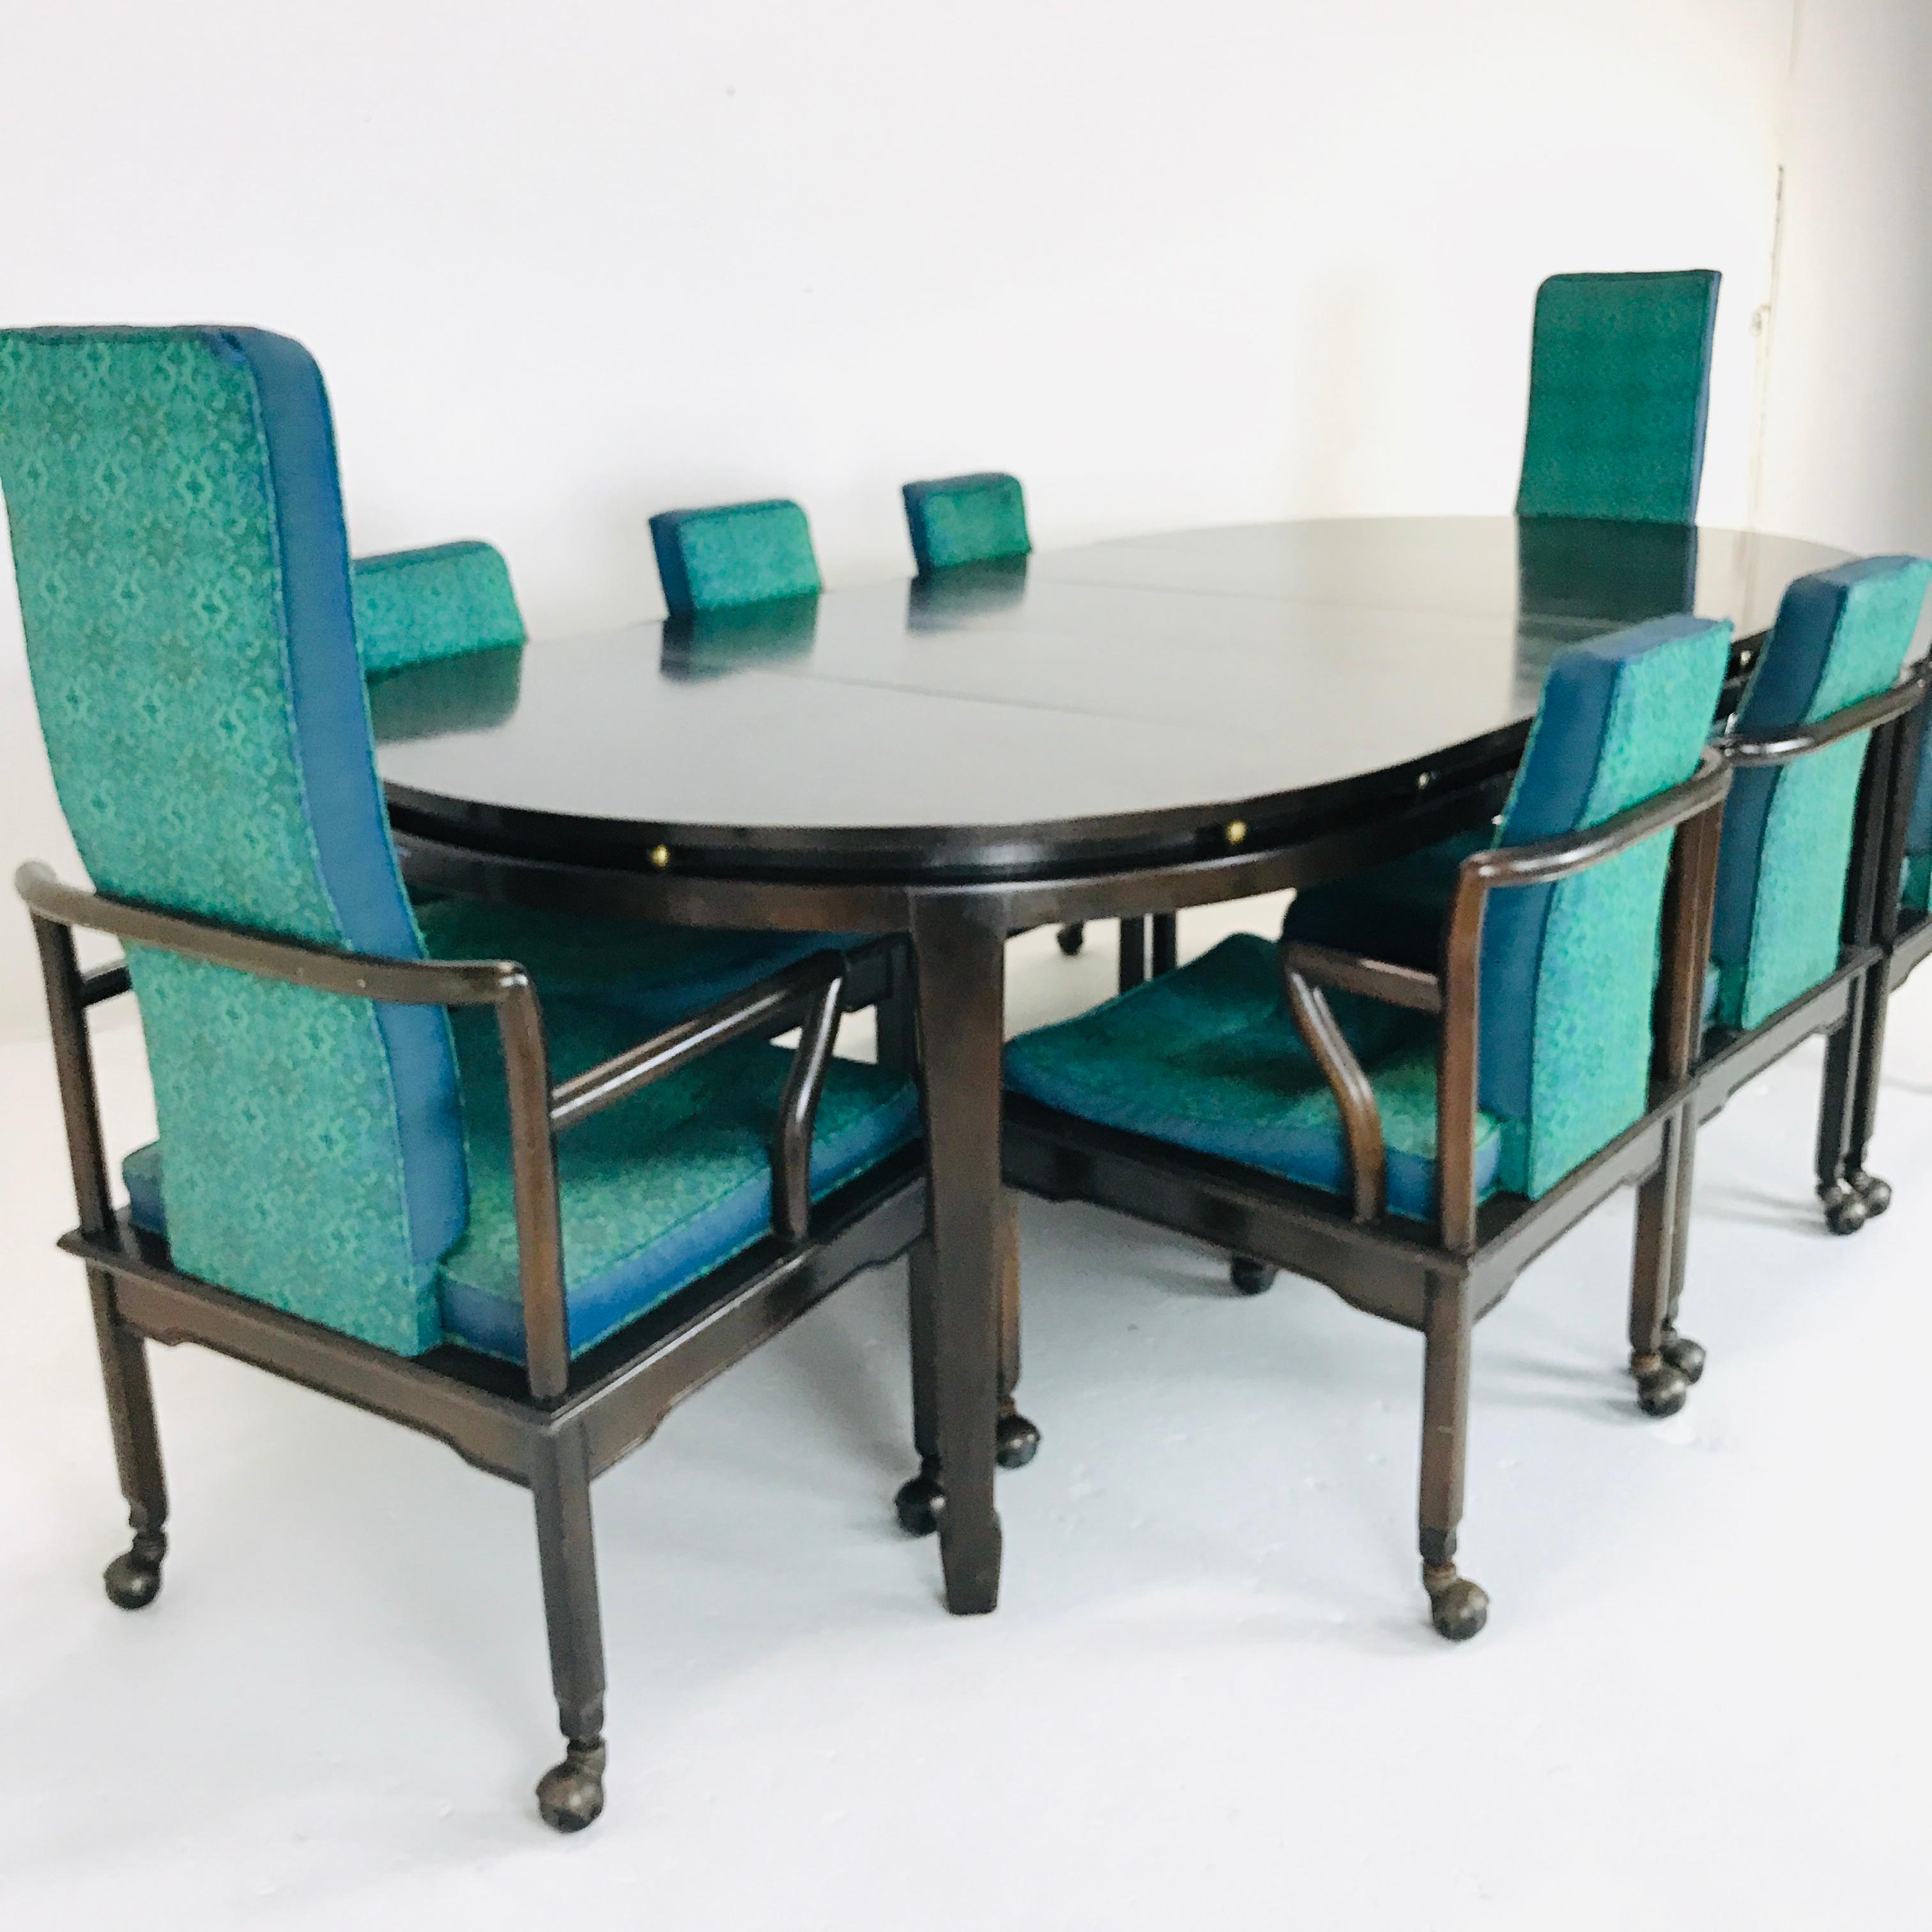 Widdicomb dining table set with 8 chairs (2 high back end chairs and 6 side chairs). Round table is 48